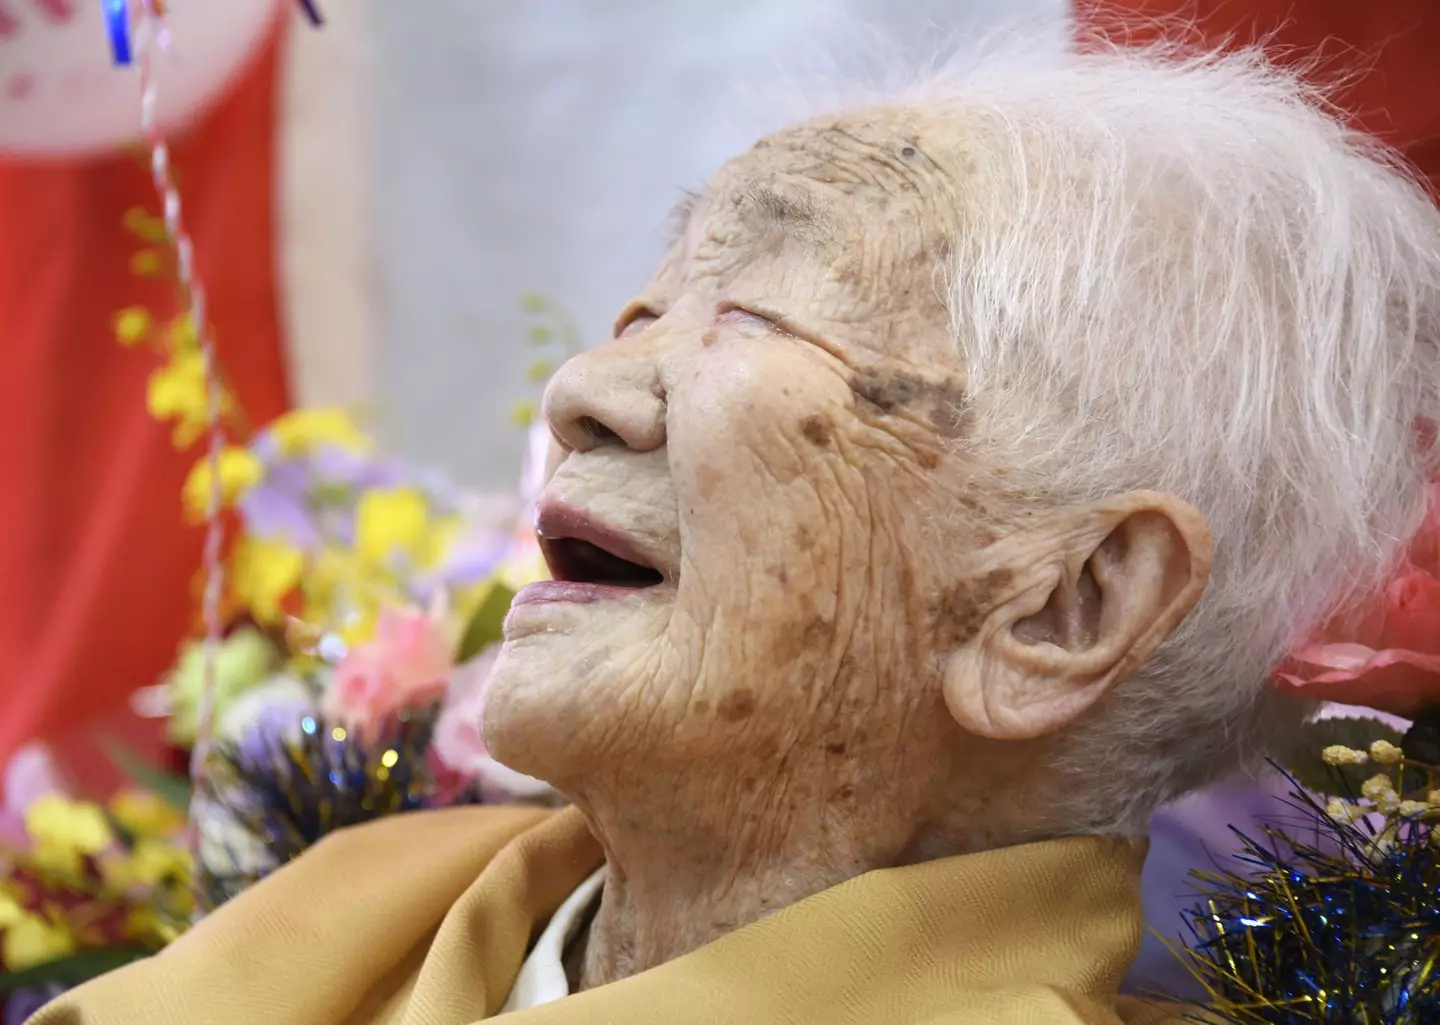 Tanaka had five kids and was married to her husband for 71 years.